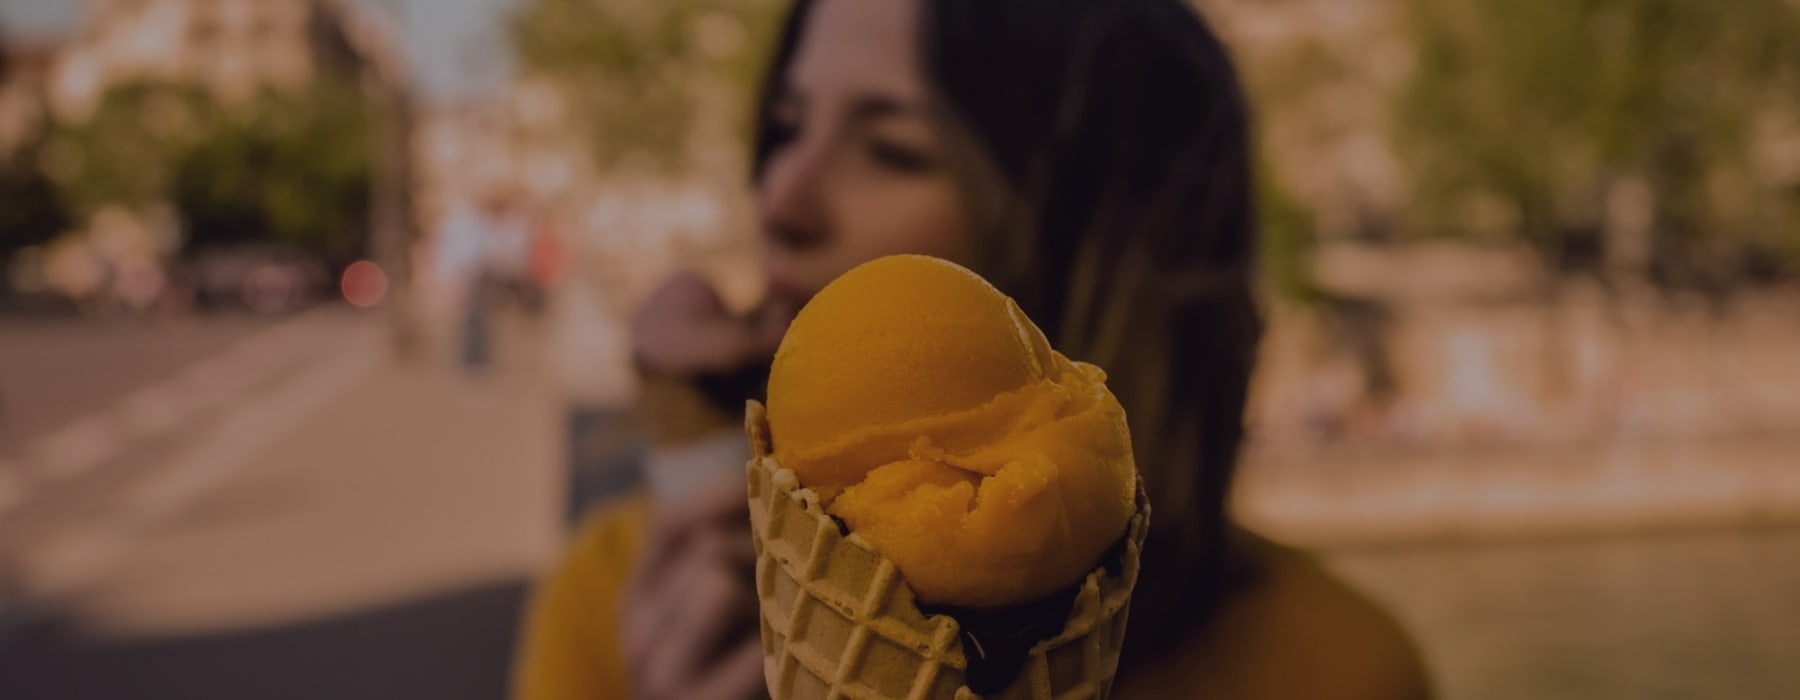 lifestyle of a close-up of ice cream with a girl in the background also eating ice cream